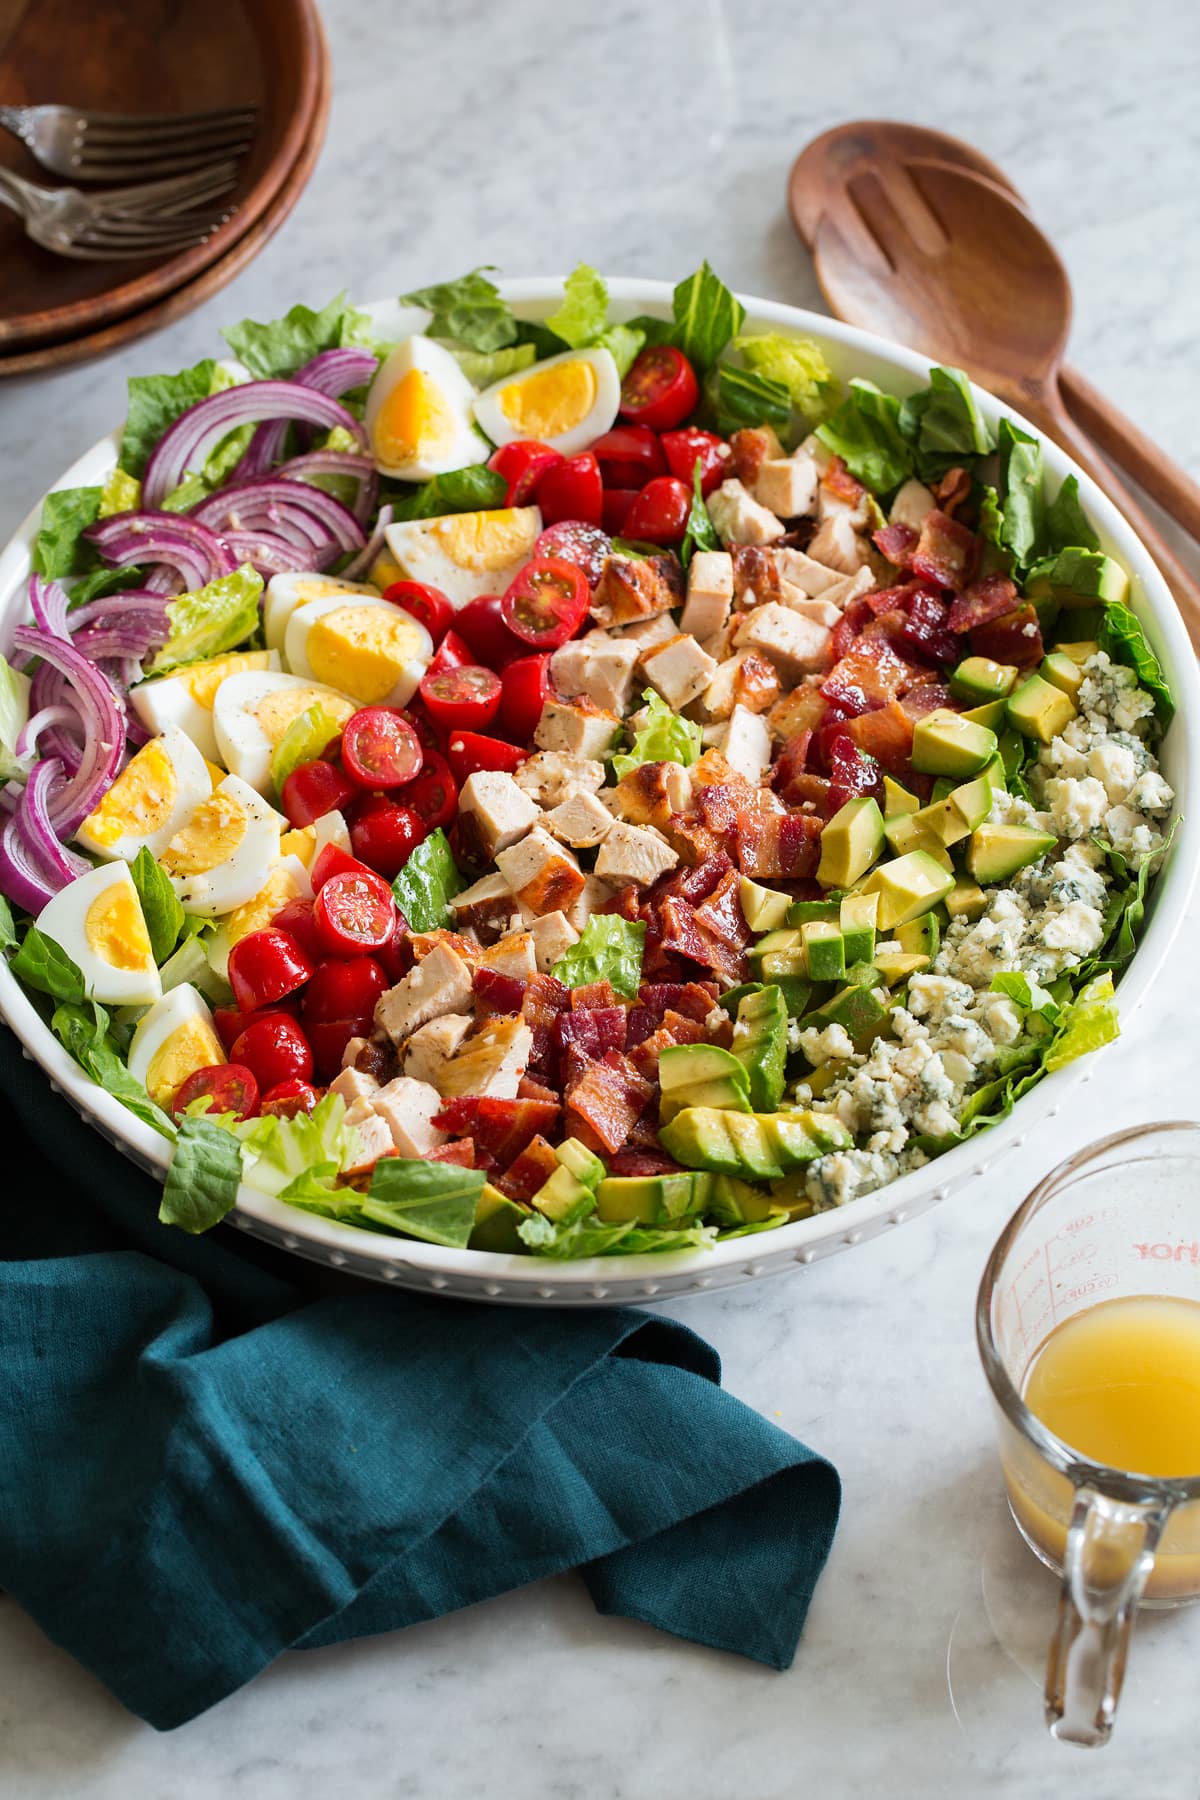 Cobb salad shown from the side on a marble surface.